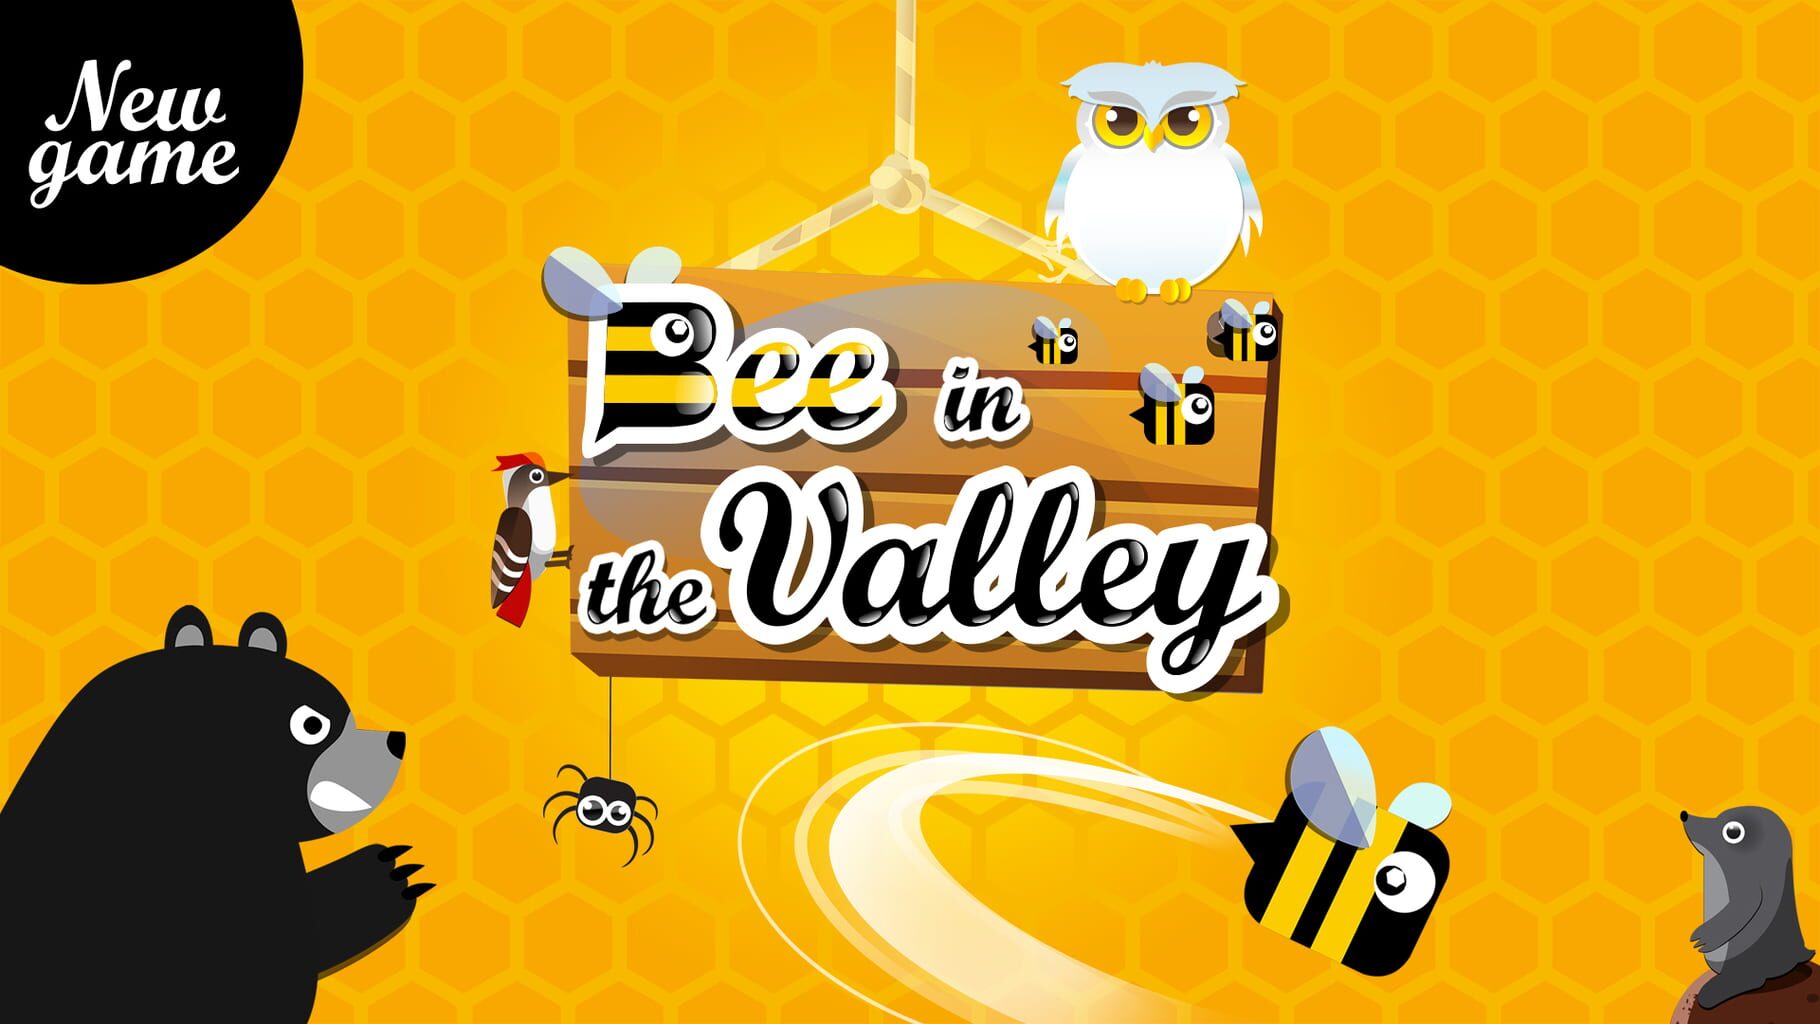 Bee in the Valley artwork